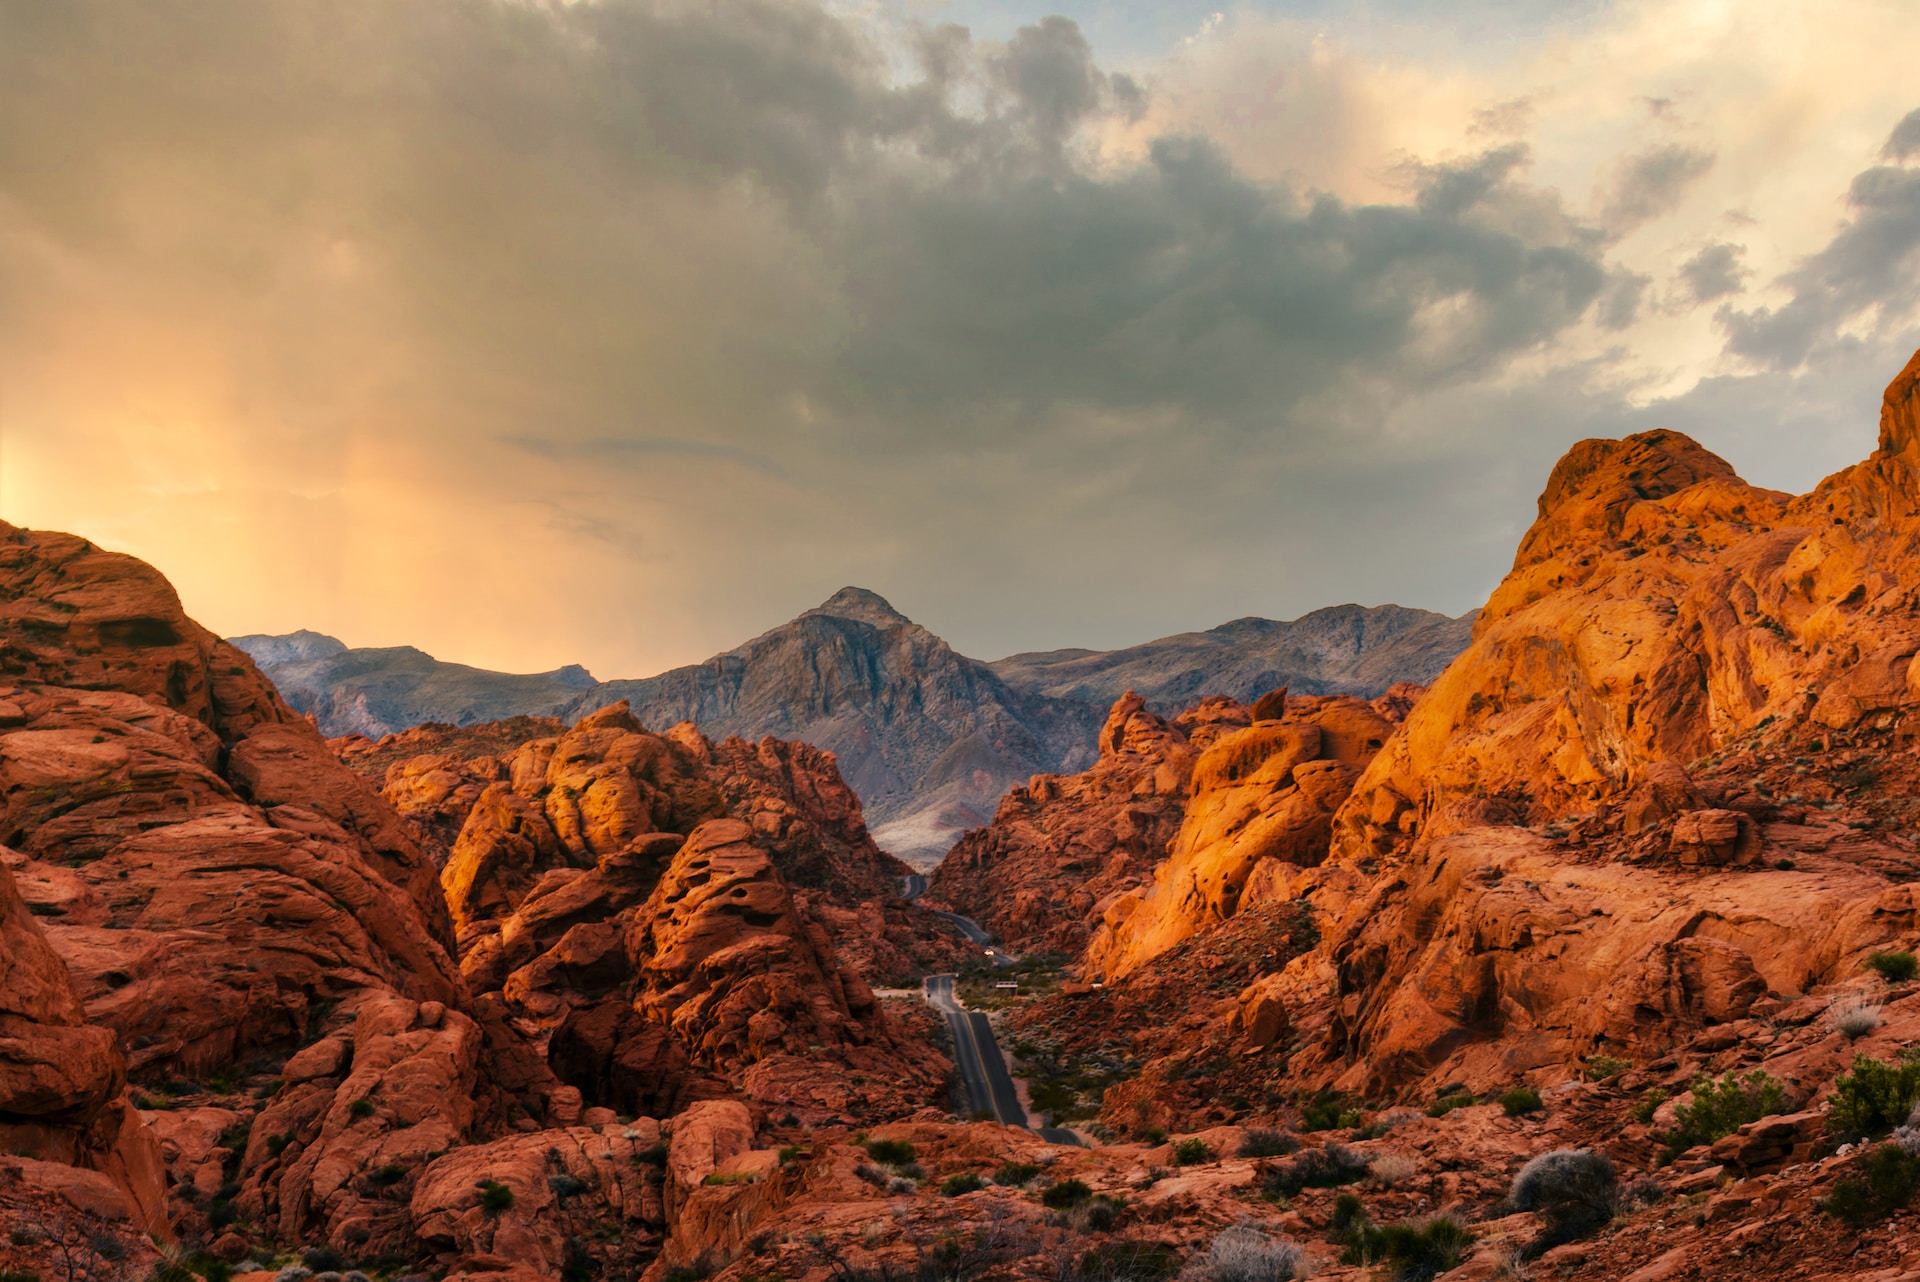 A canyon in Nevada during the sunset.